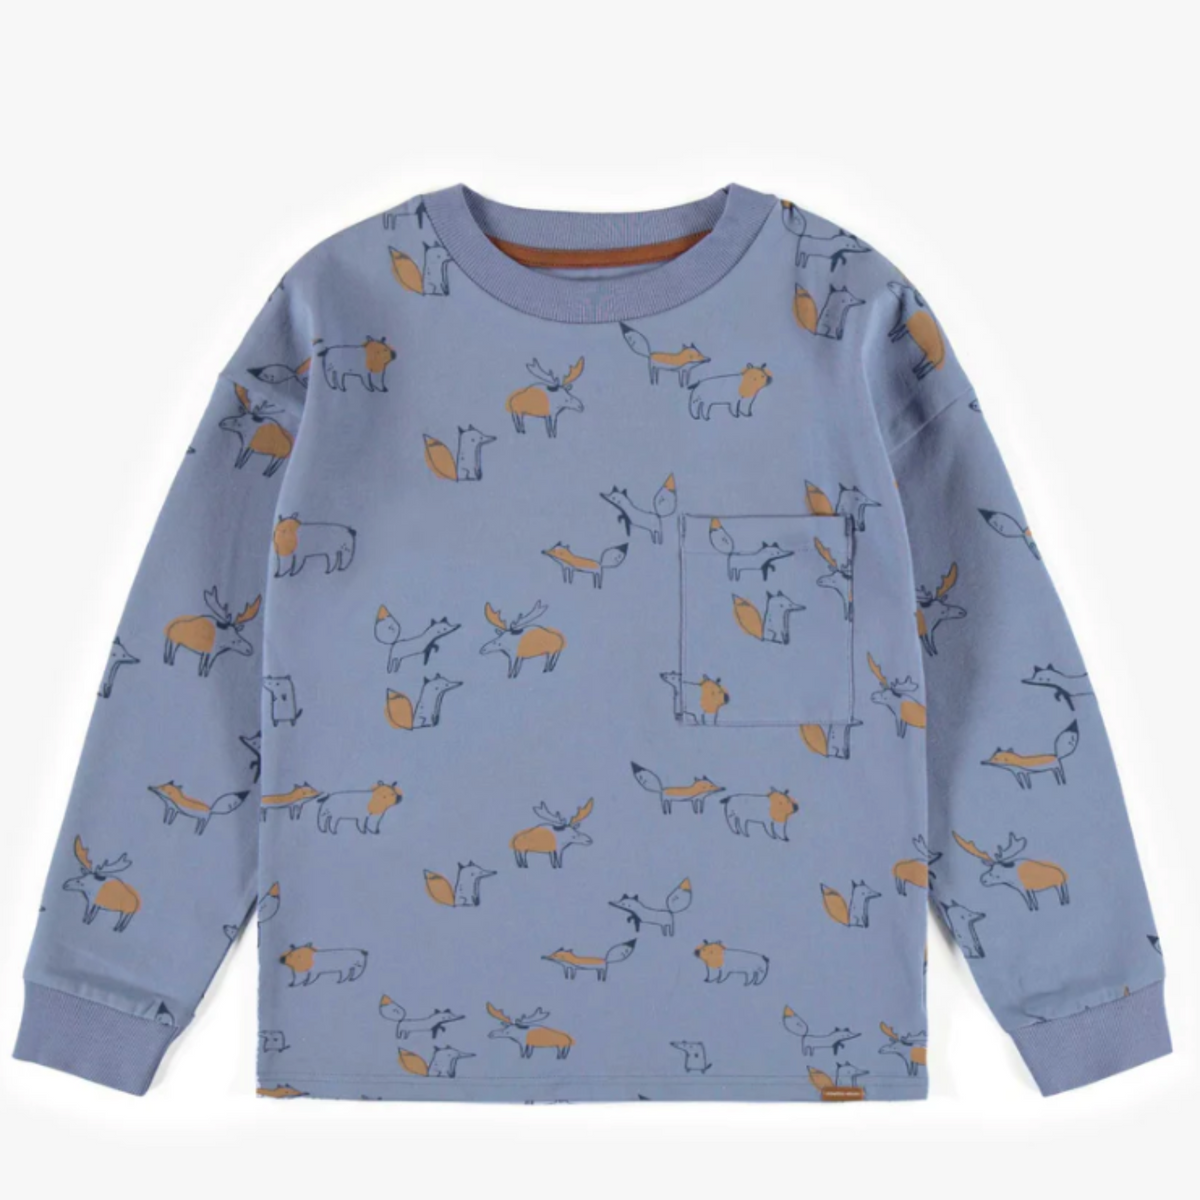 Blue Long Sleeved T-Shirt with Animal Patterns in Jersey, Child